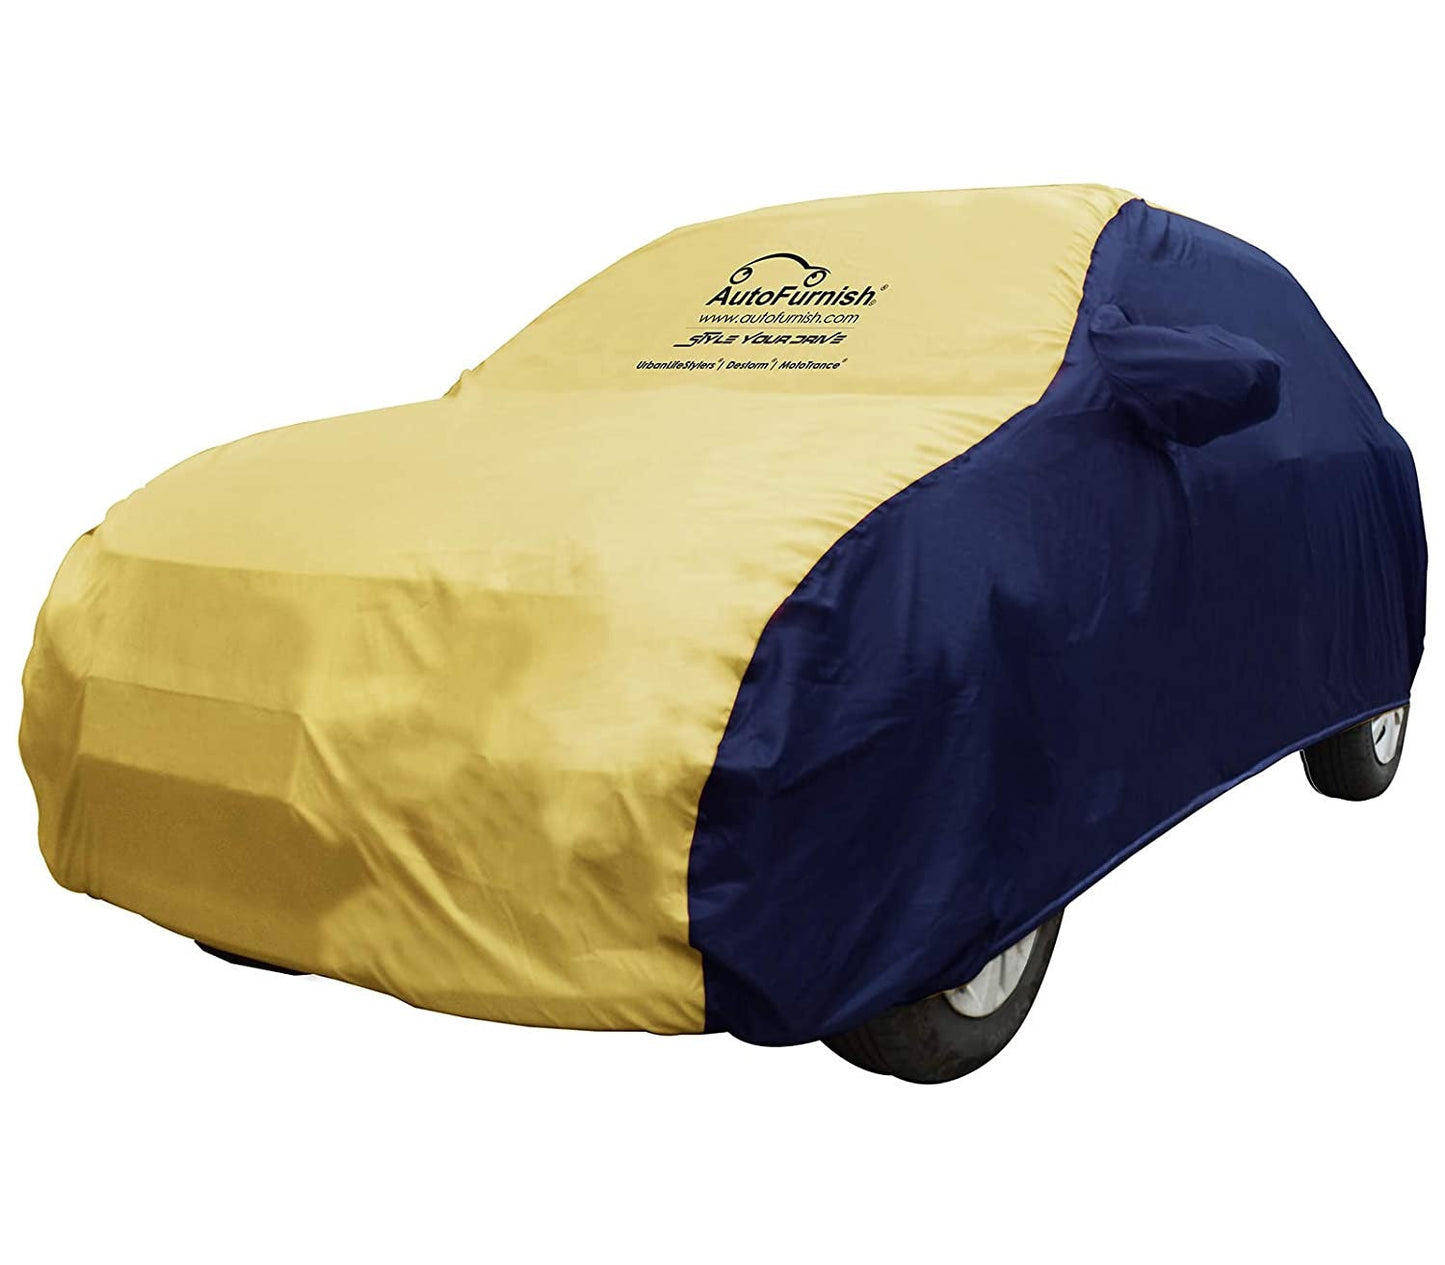 Audi S5 (2019) Car Body Cover, Triple Stitched, Heat & Water Resistant with Side Mirror Pockets (SPORTY Series)